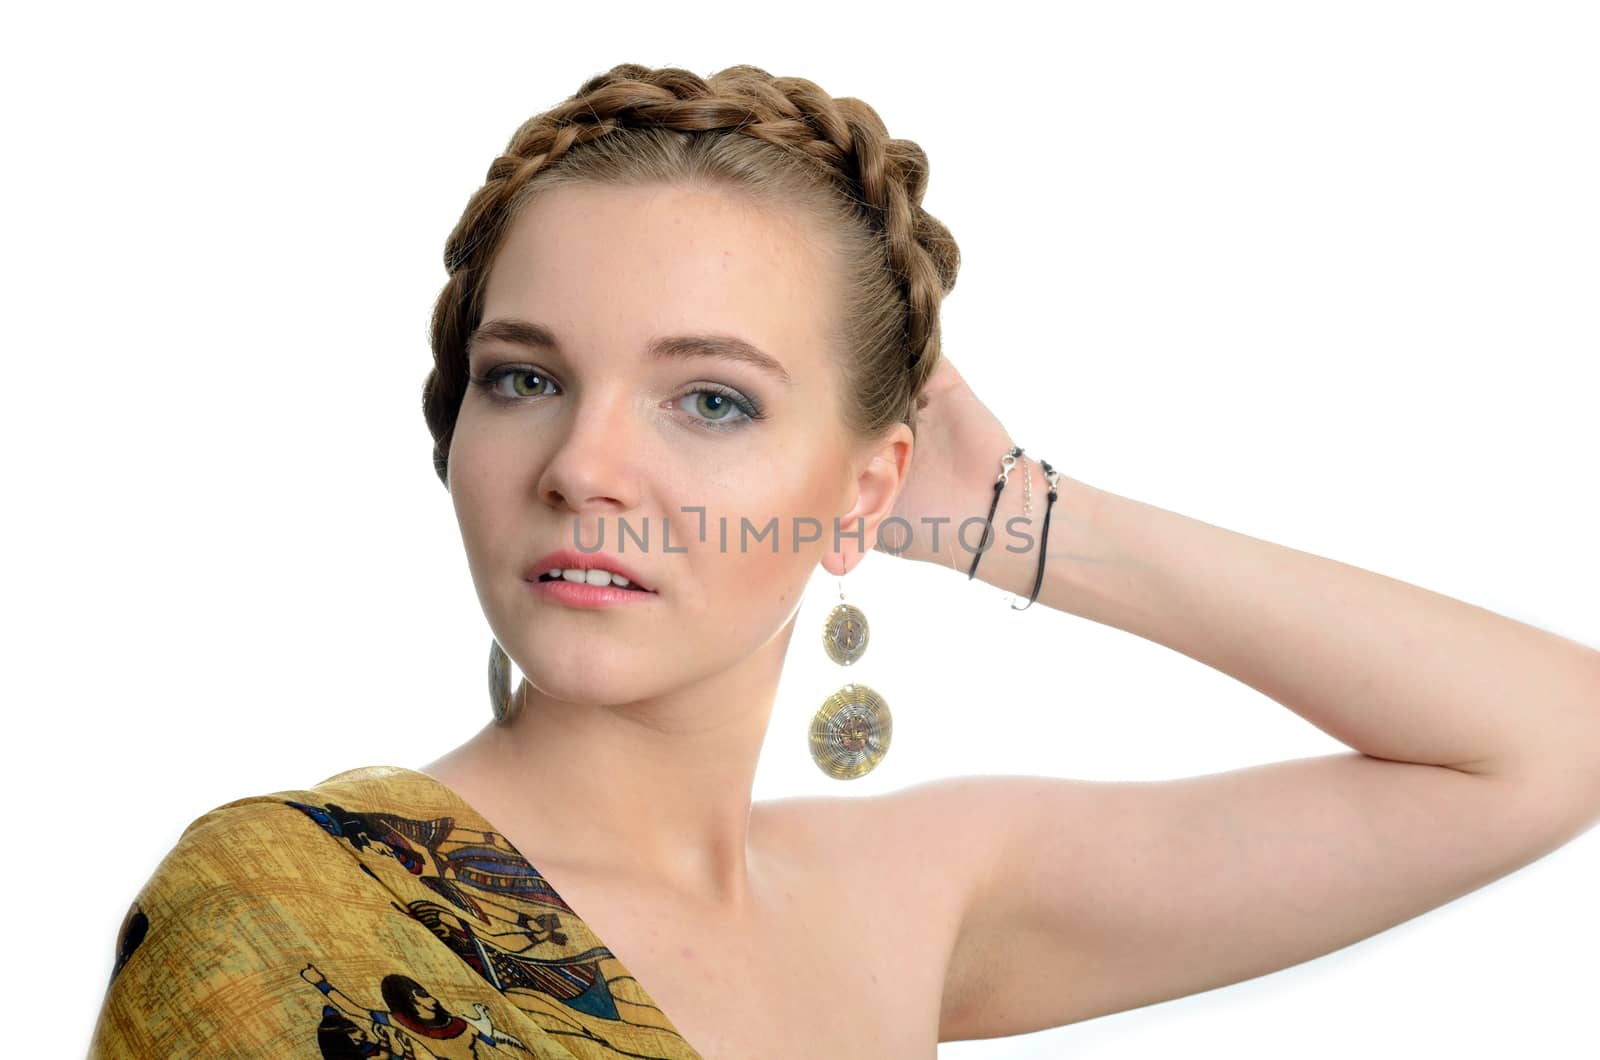 Female model with earrings. Young girl with blond hairs, pretty with kind face expression.